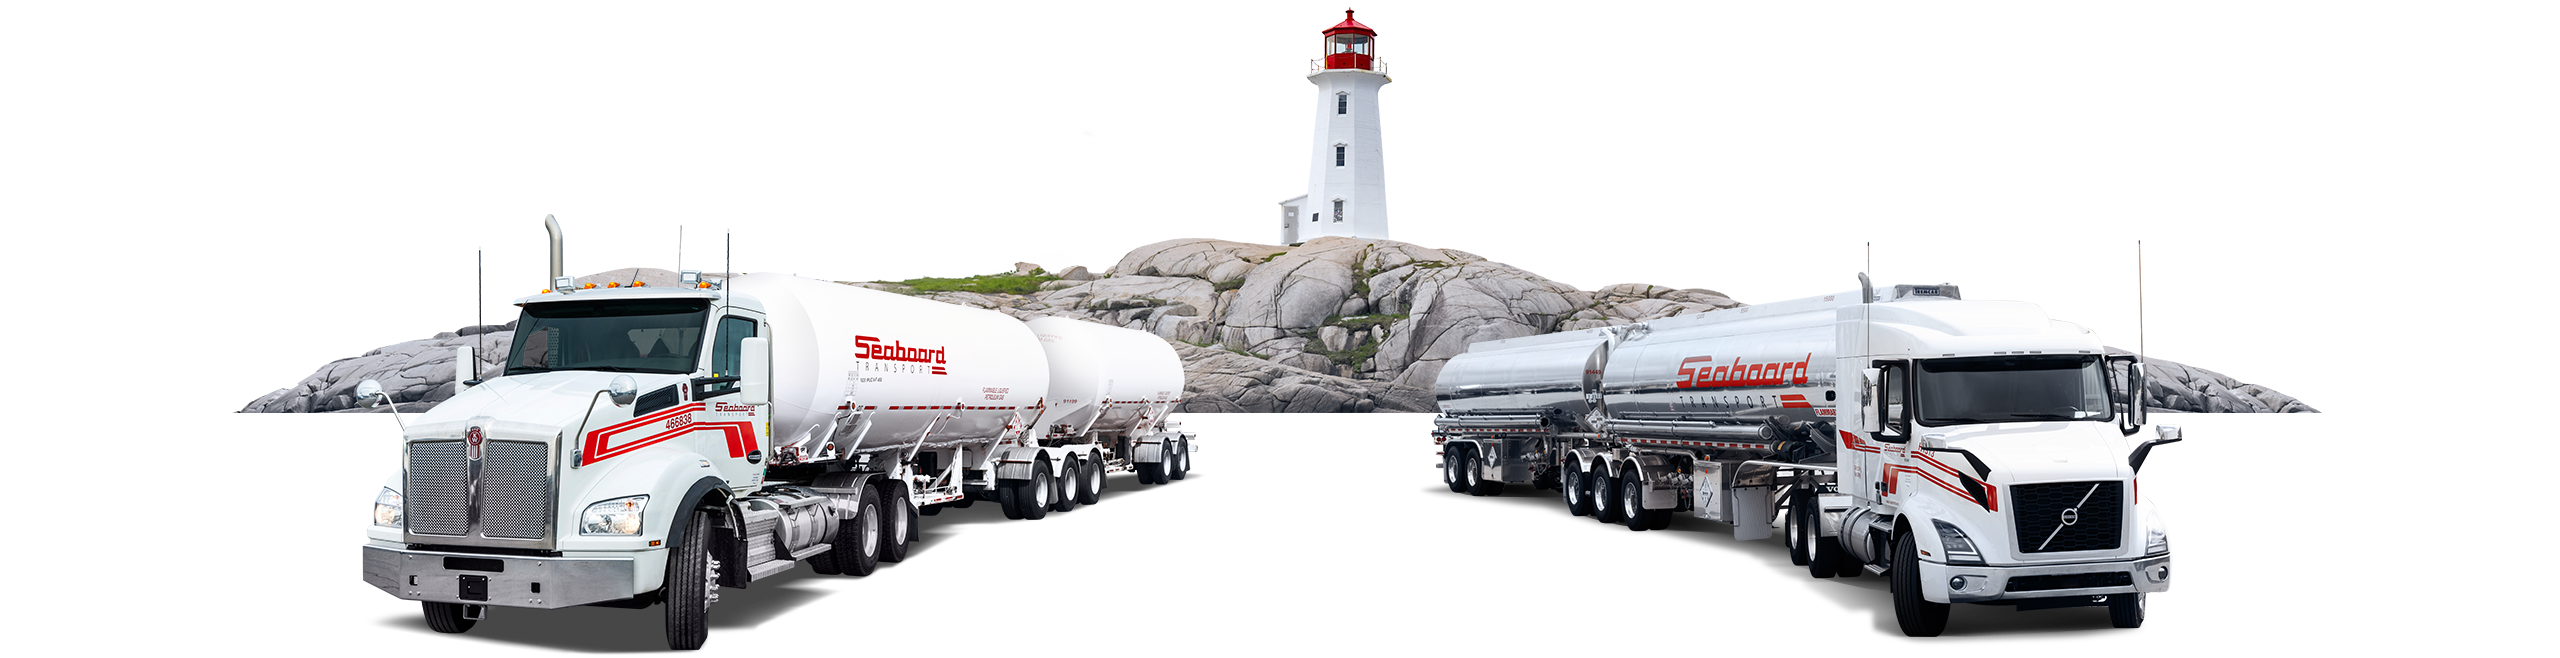 Two Seaboard Transport double tanker trucks in front of East Coast Canada lighthouse